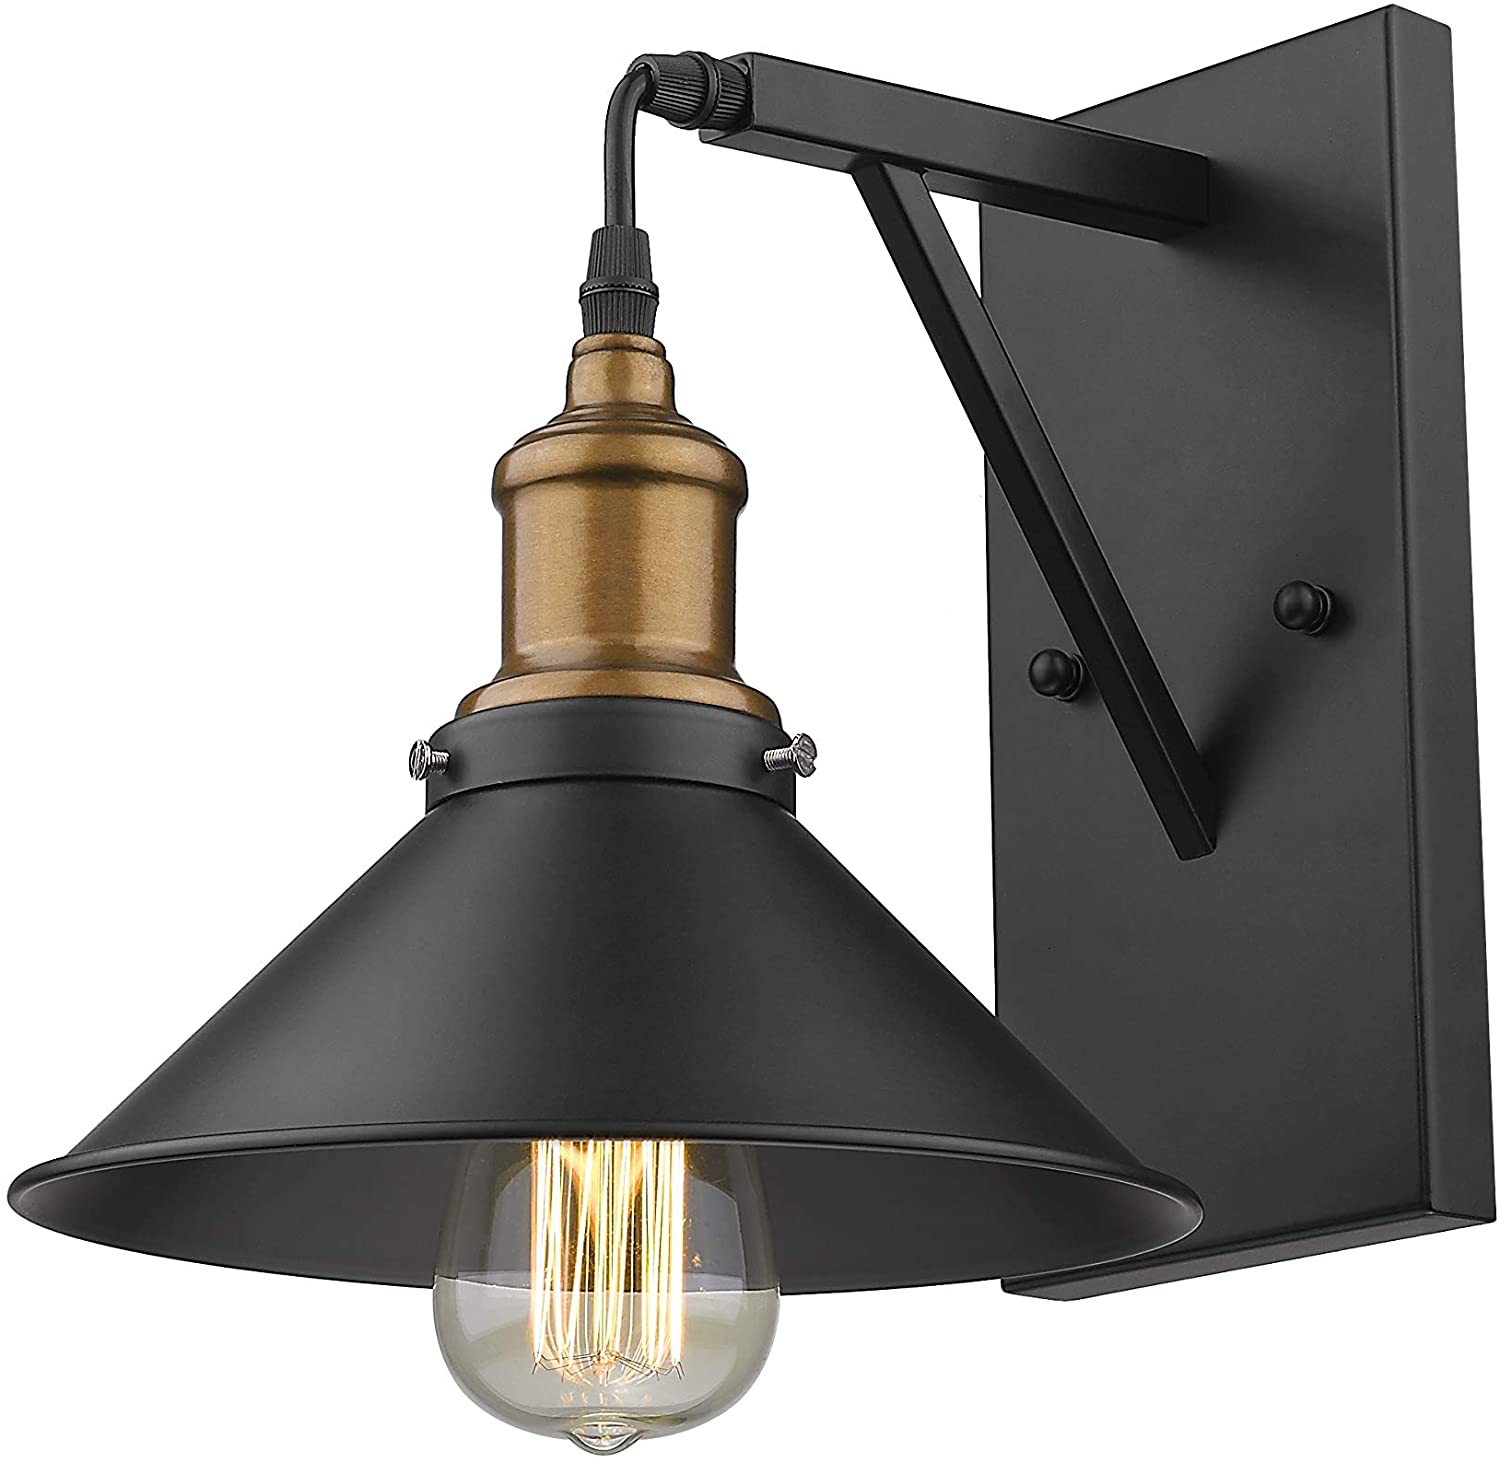 Black farmhouse wall sconce vintage industrial wall light fixture